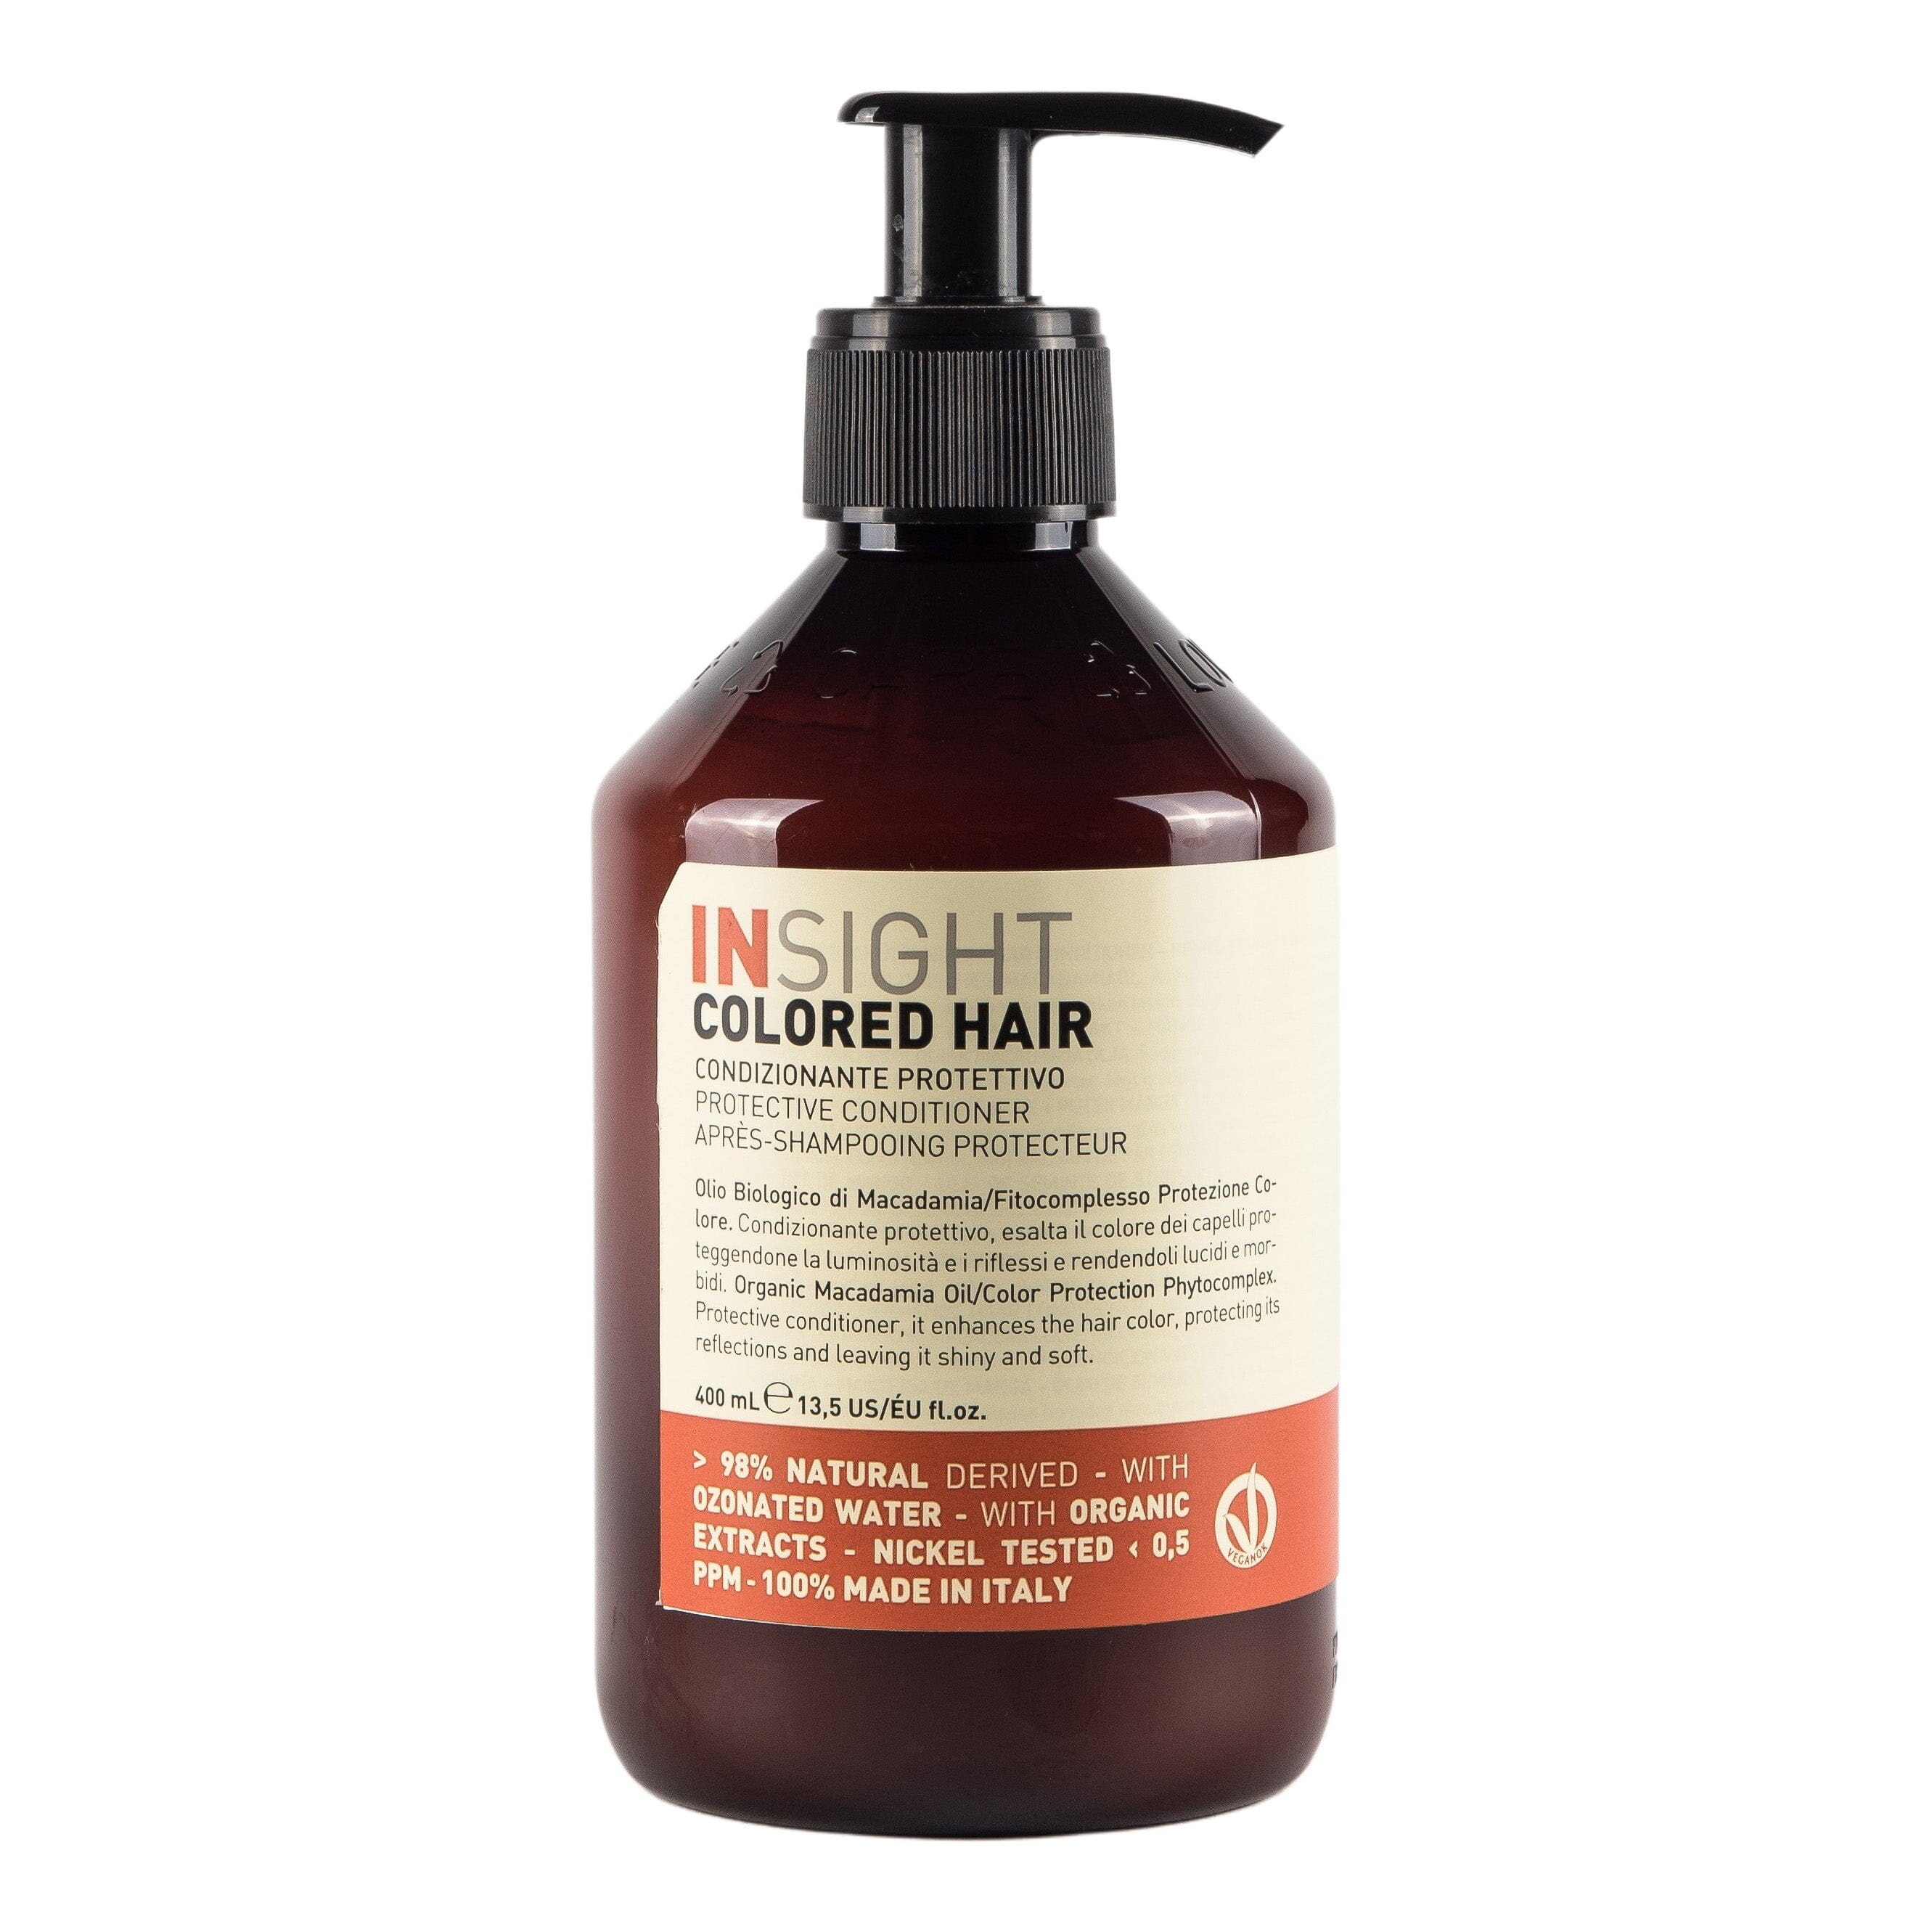 Insight Colored Hair - Protective balsam 400 ml